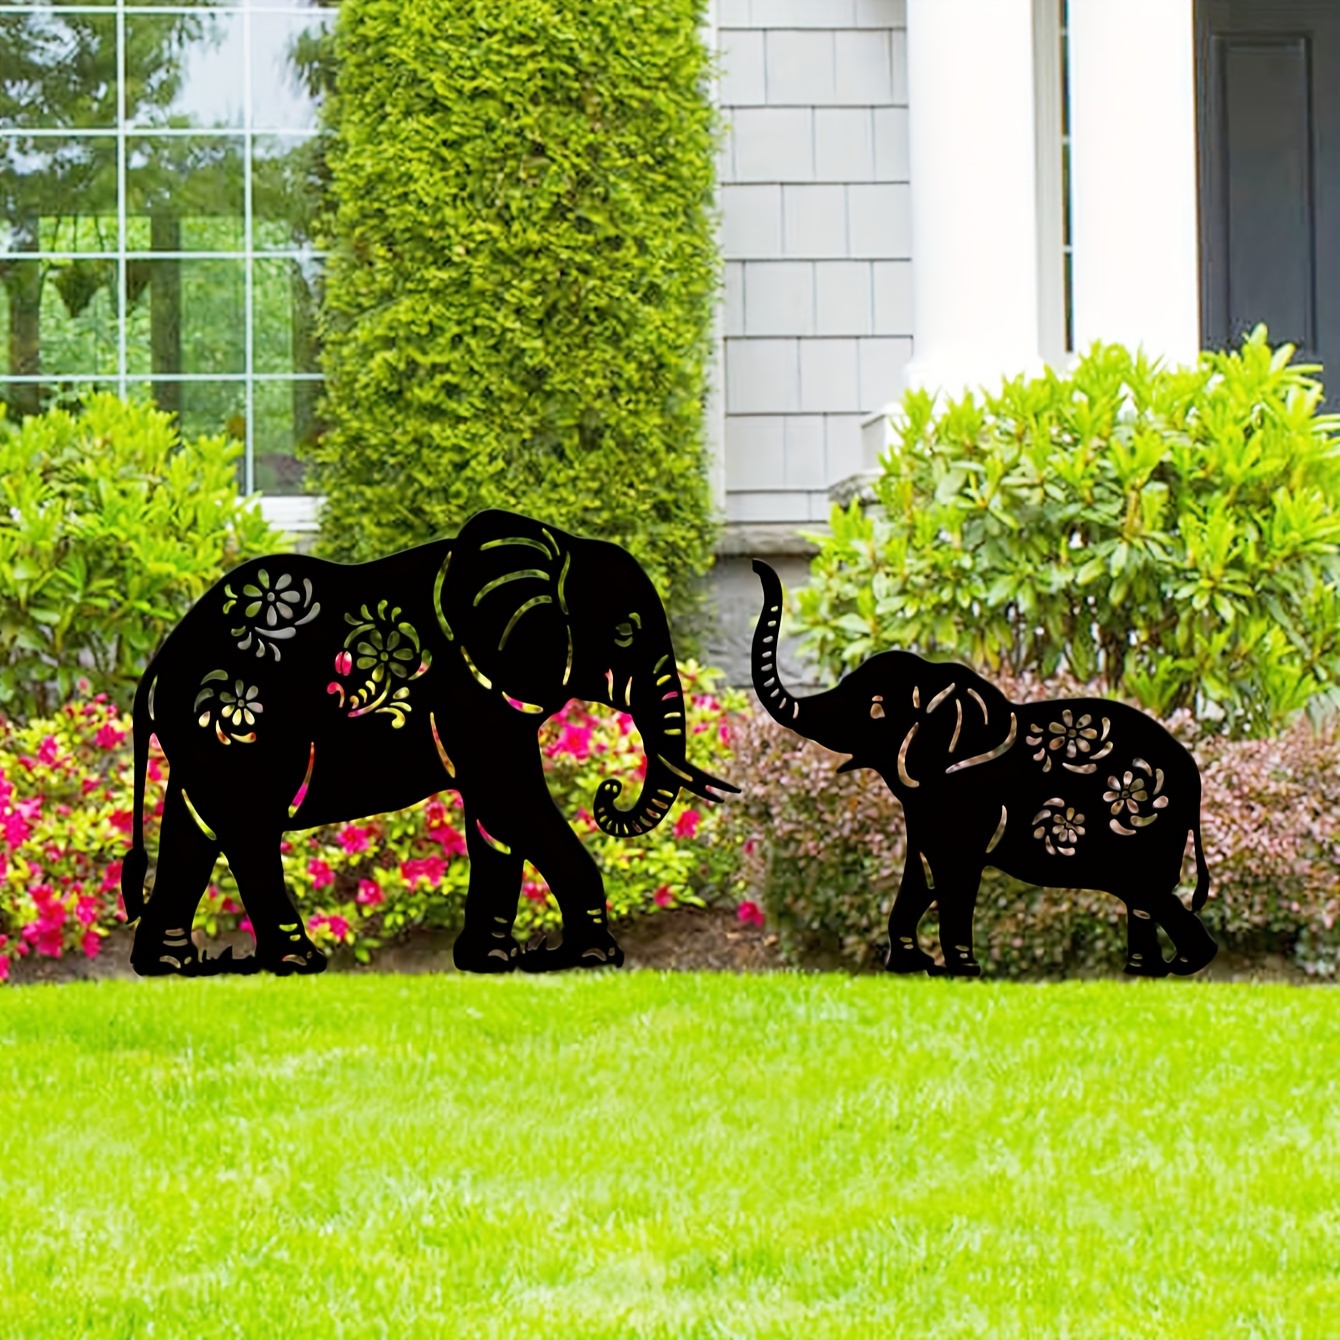 

1pc Elephant Silhouette Garden Sign With Stakes, Metal Ground Insert Garden Decor, Outdoor Home Decor, Insert Decoration For Home Garden Patio, Fence Yard Lawn Art Decor, Spring Decoration